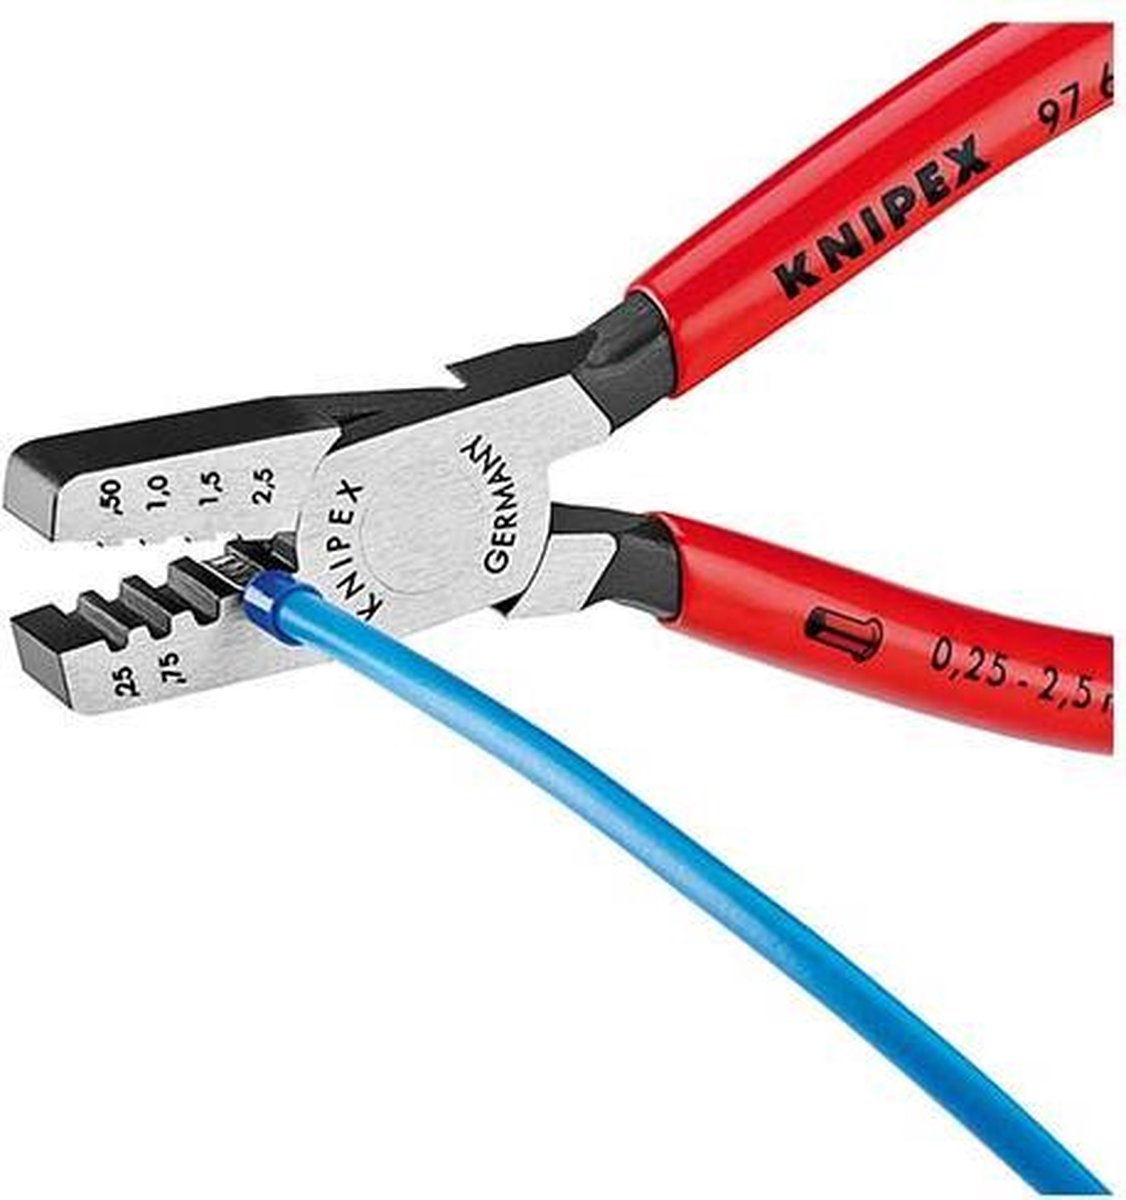 Knipex 9761145F Adereindhulstang - 145mm | bol.com